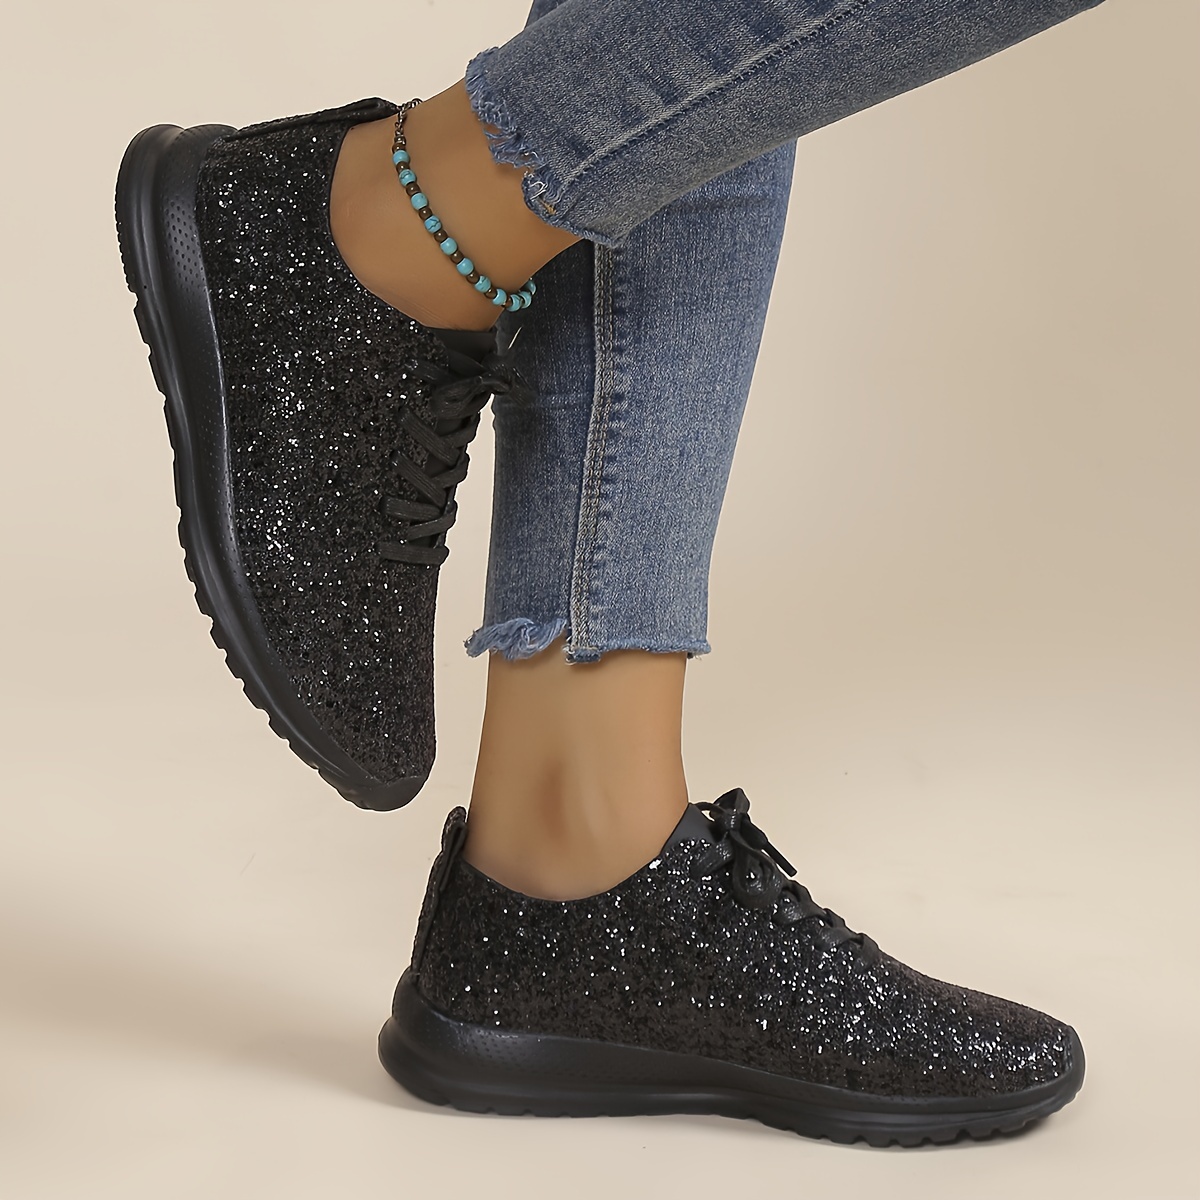 Solid Color Sequins Glitter Sneakers, Women's Decor Stylish Lace Up Lightweight Sport Shoes,Women Tennis Shoes,Temu